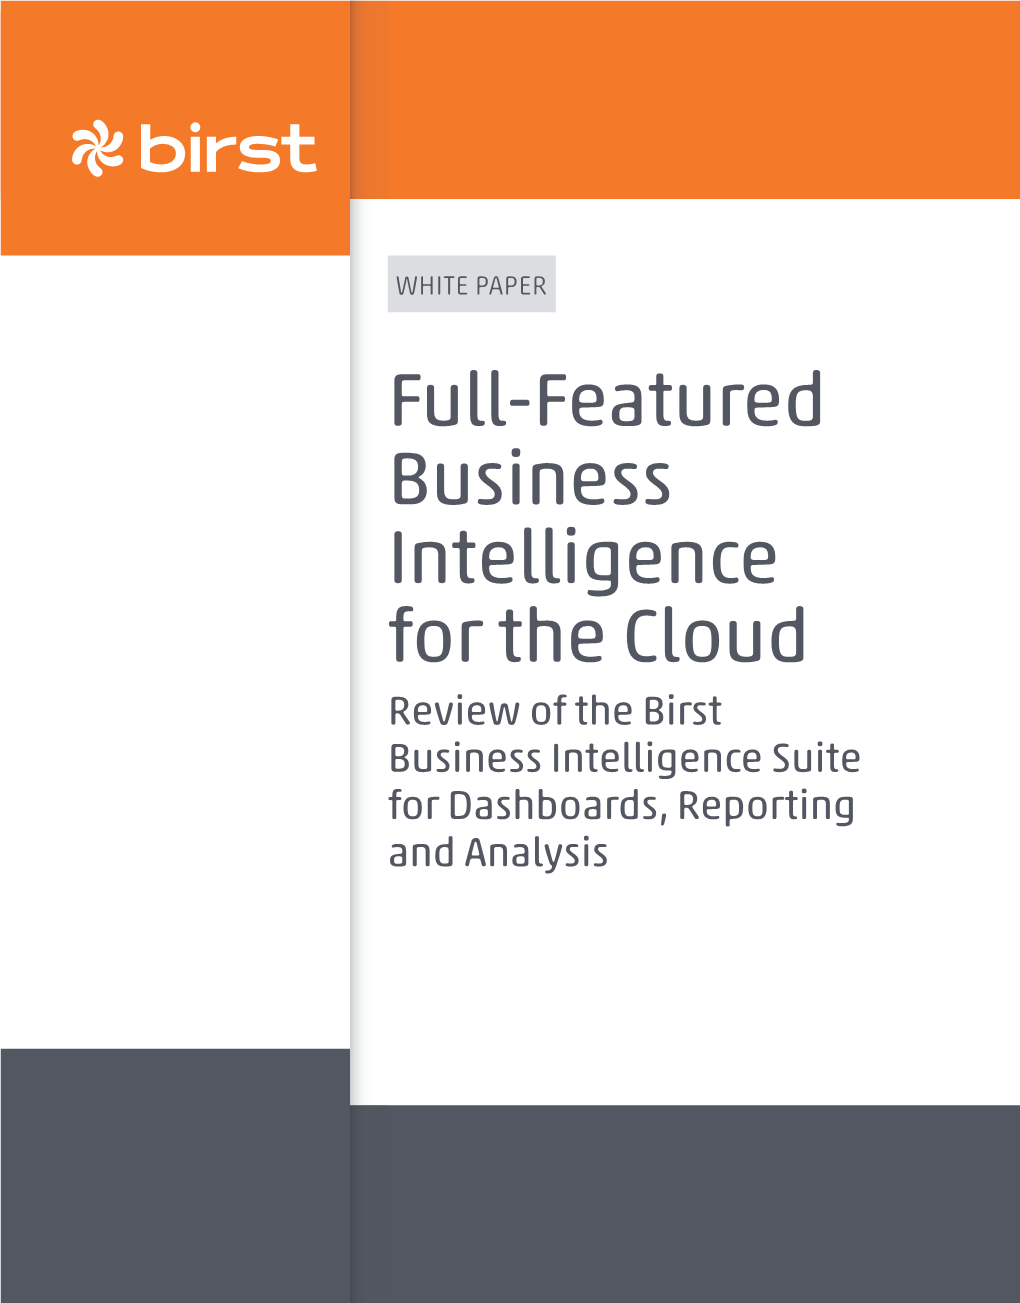 Full-Featured Business Intelligence for the Cloud Review of the Birst Business Intelligence Suite for Dashboards, Reporting and Analysis